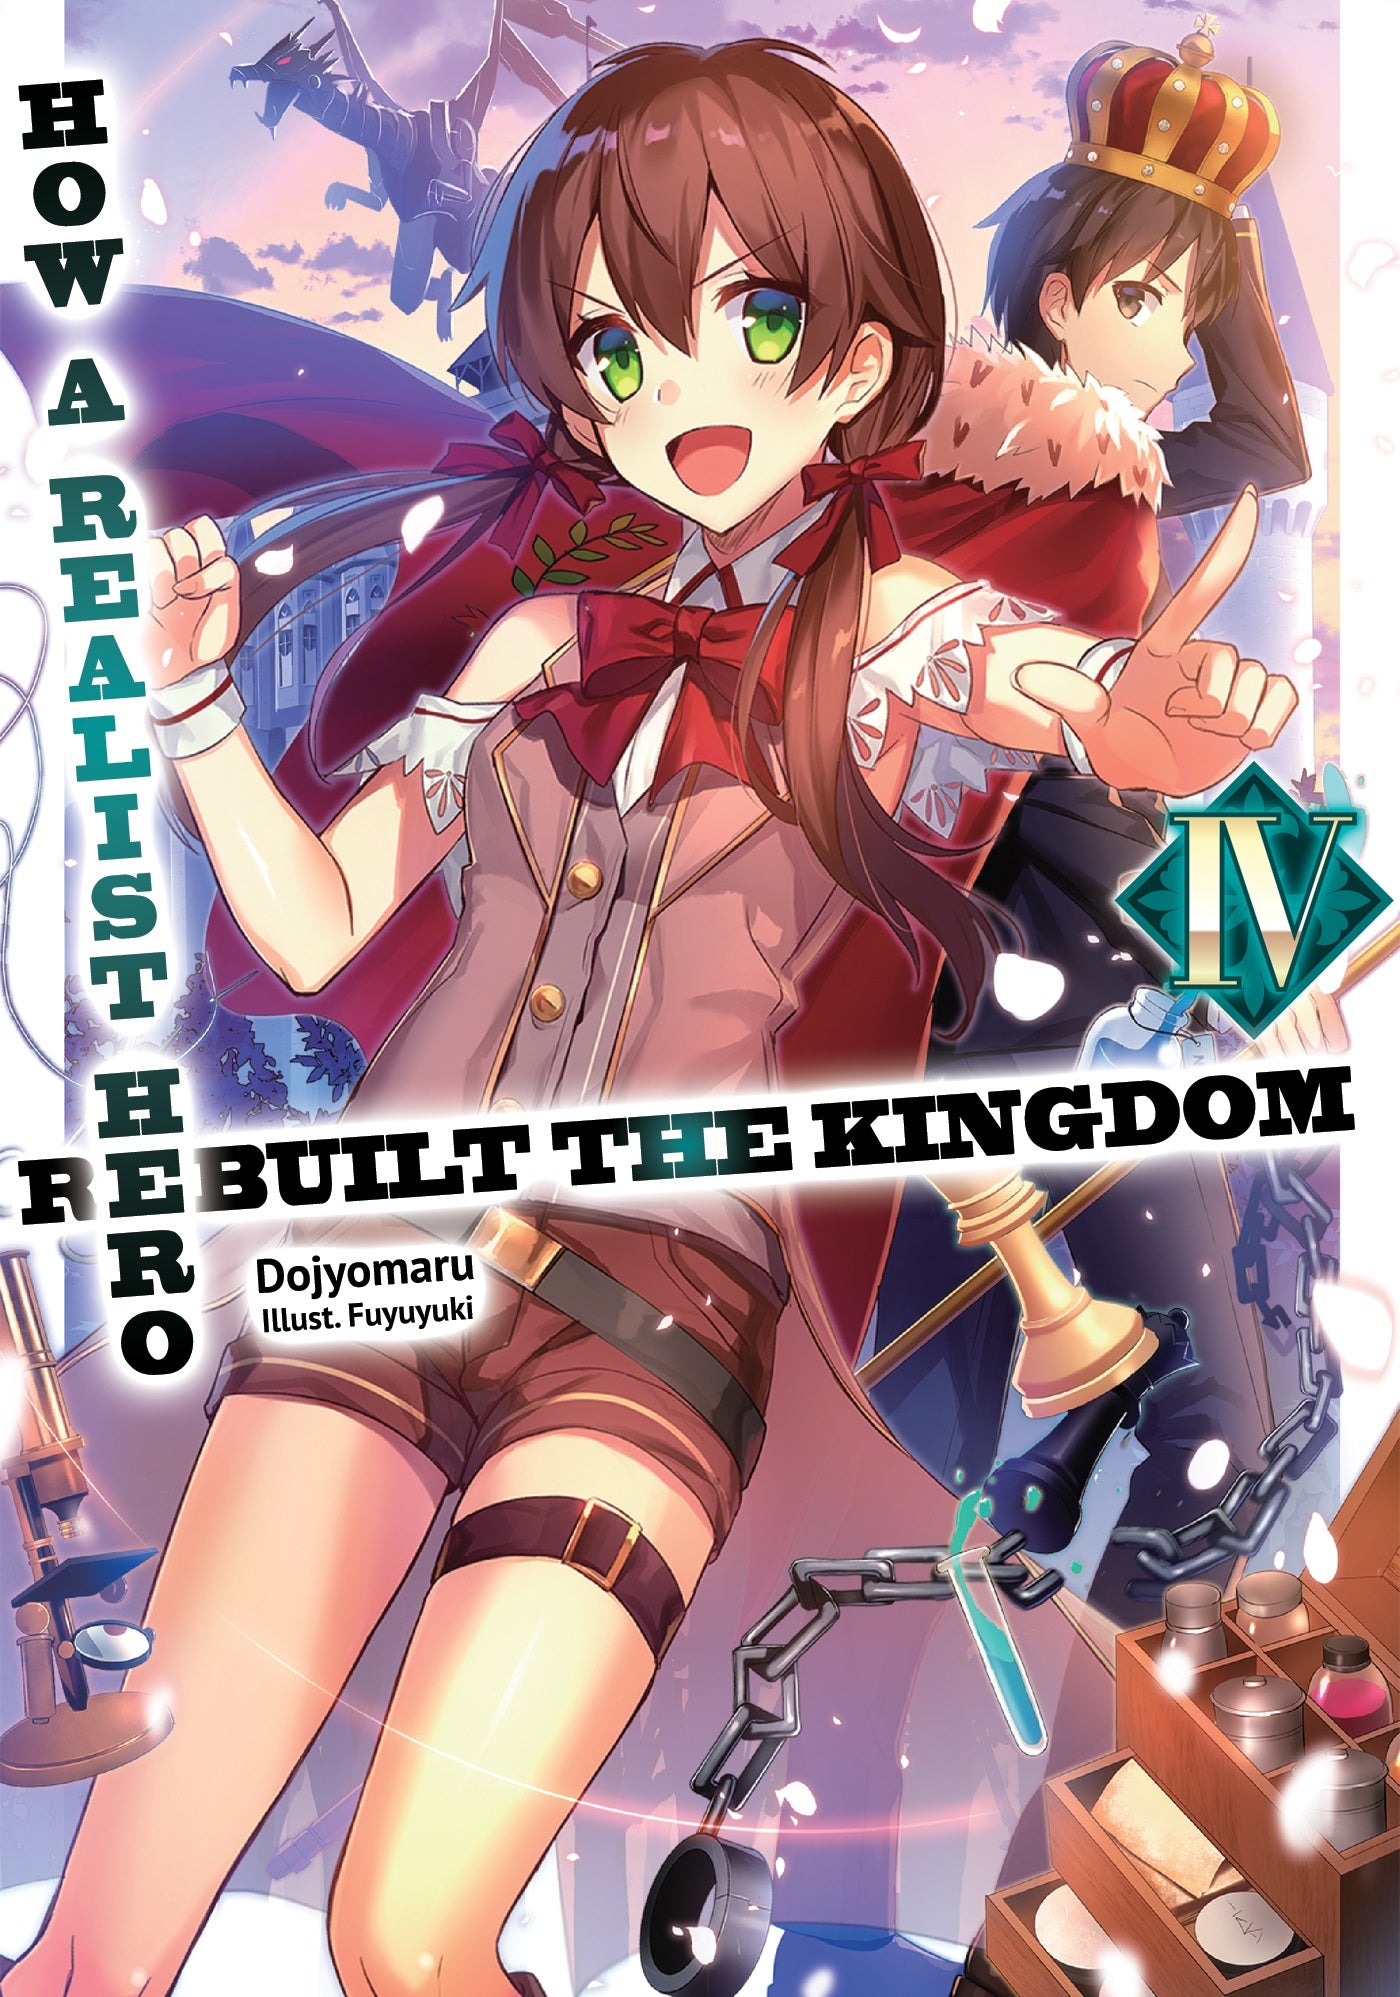 How a Realist Hero Rebuilt the Kingdom (Light Novel) Vol. 04 (Out of Stock Indefinitely)